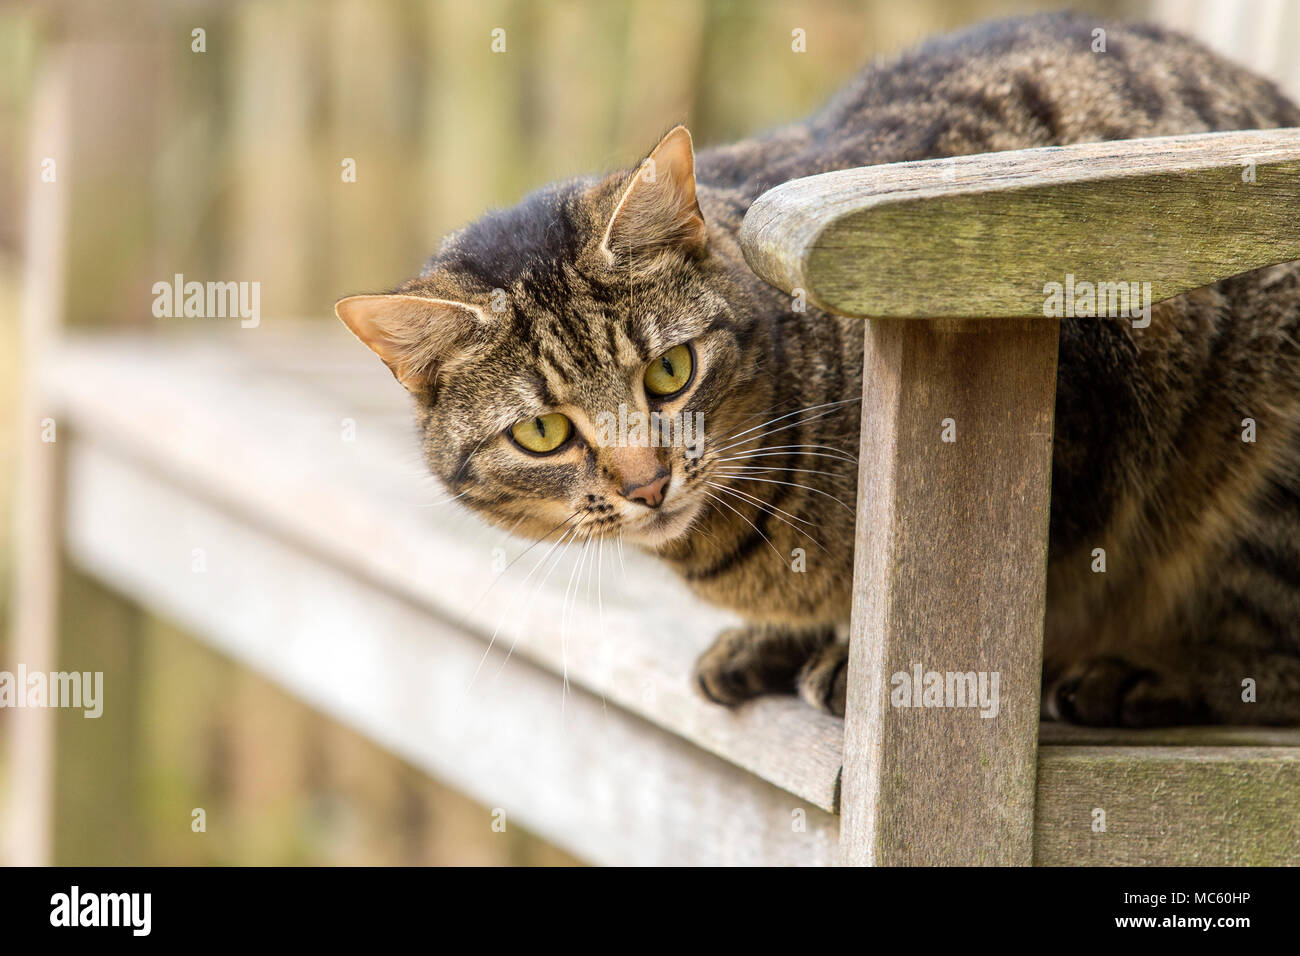 Young tabby cat, bengal cat sat outdoors on a garden bench Stock Photo